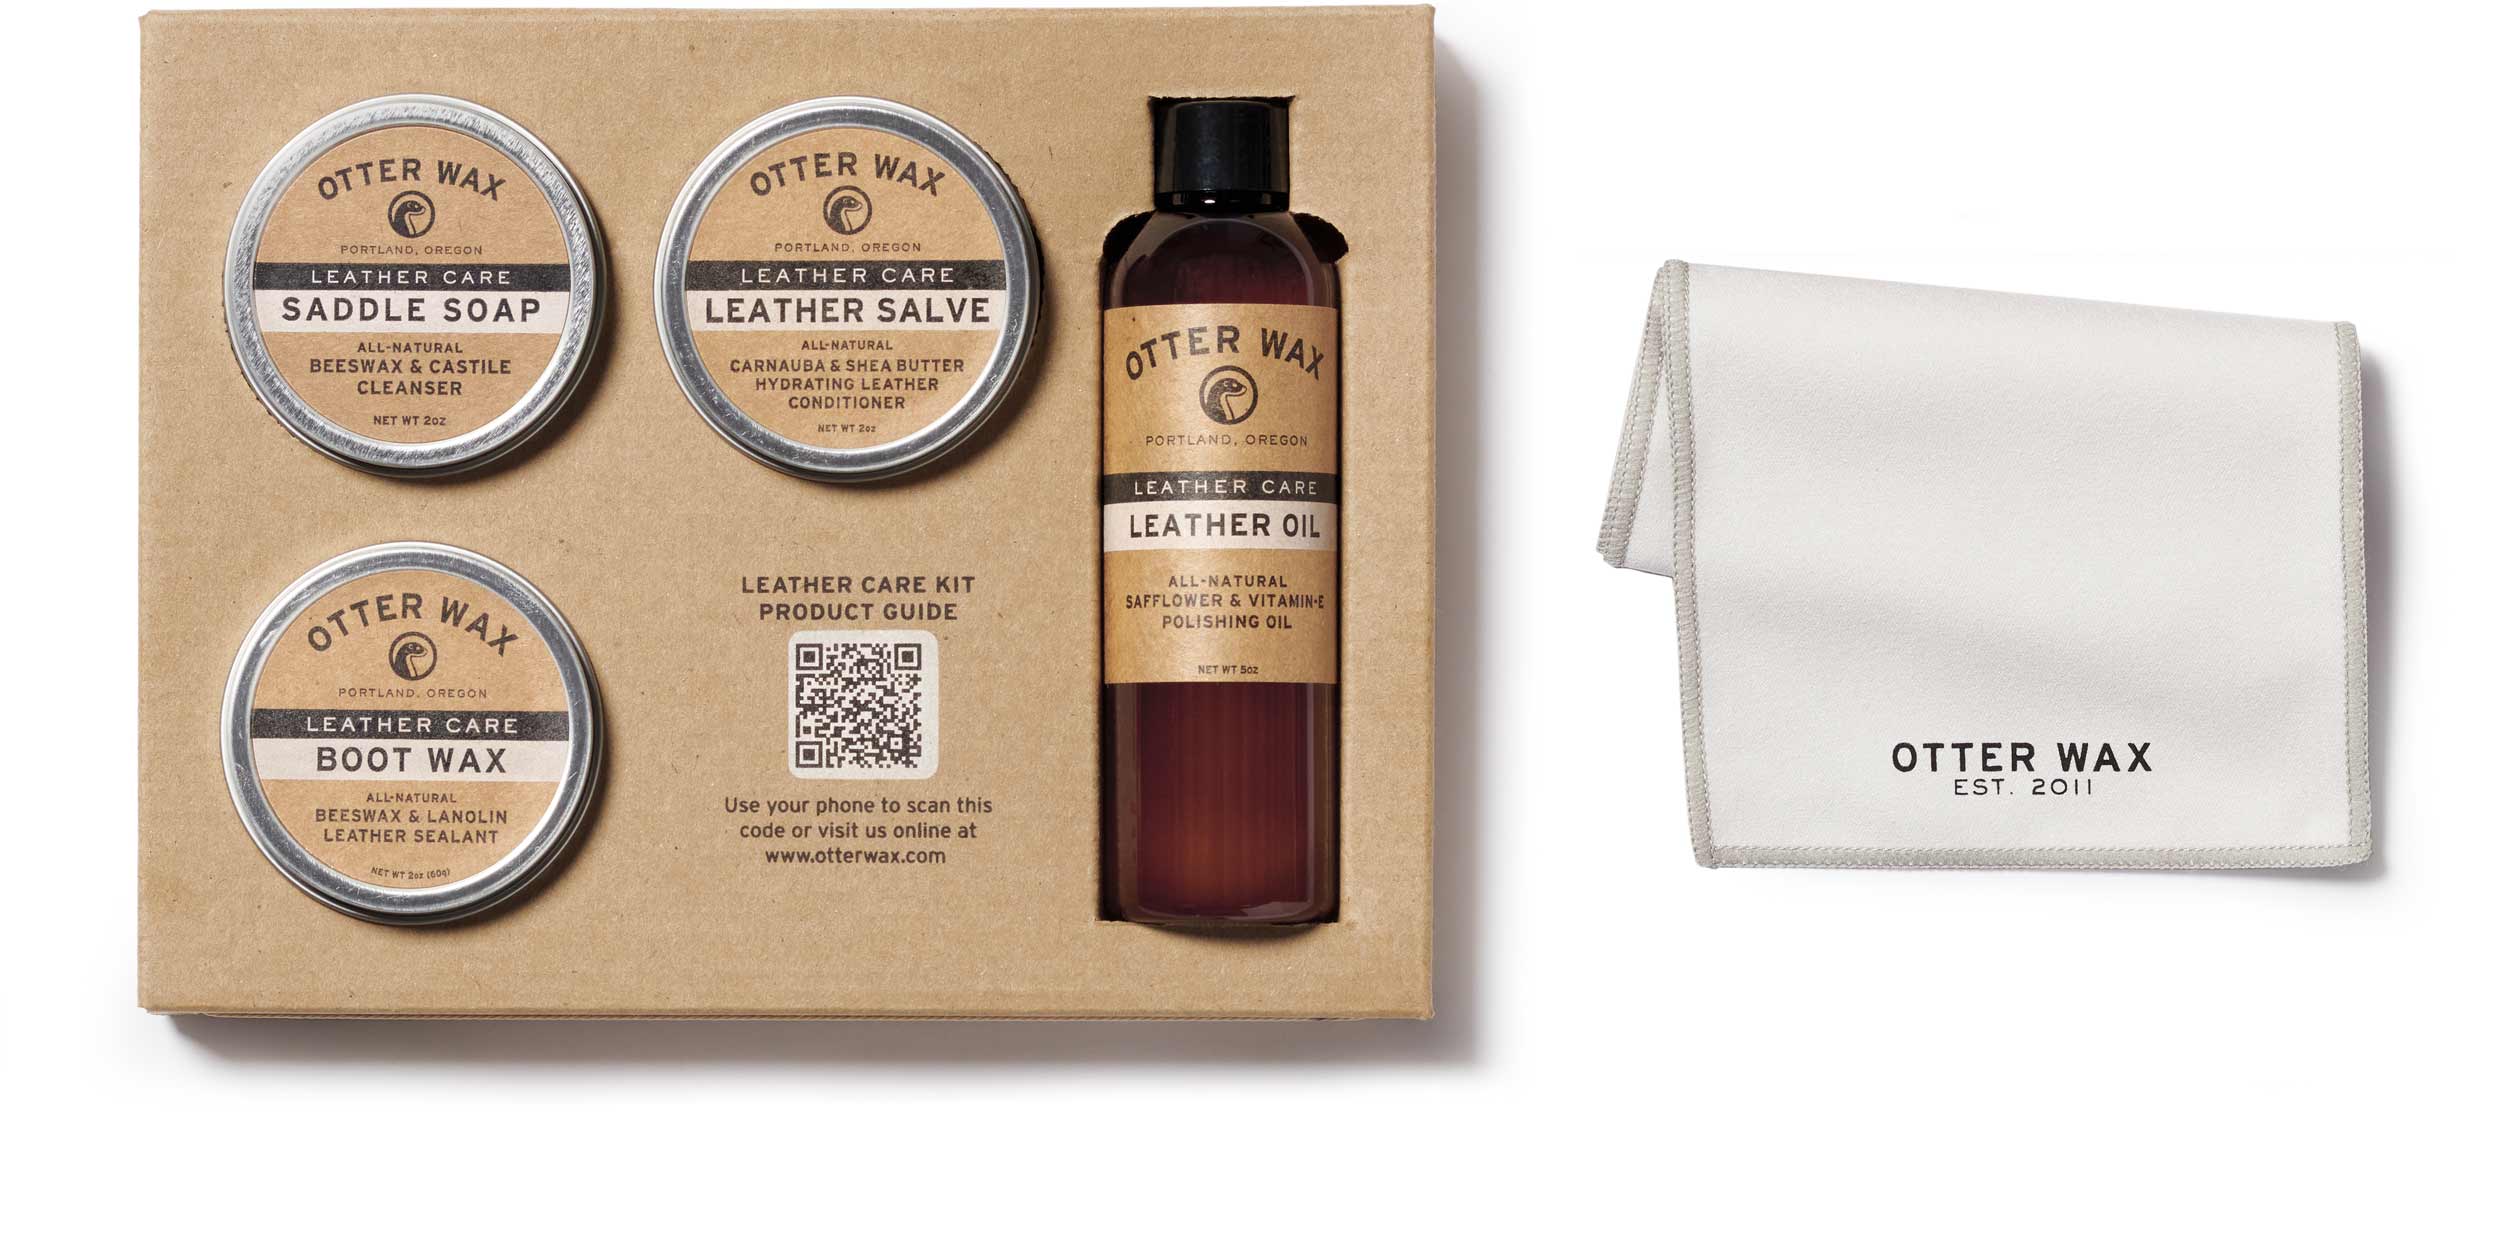 Otter Wax x Red Clouds: Waxed Fabric Care Kit №1 - Red Clouds Collective -  Made in the USA